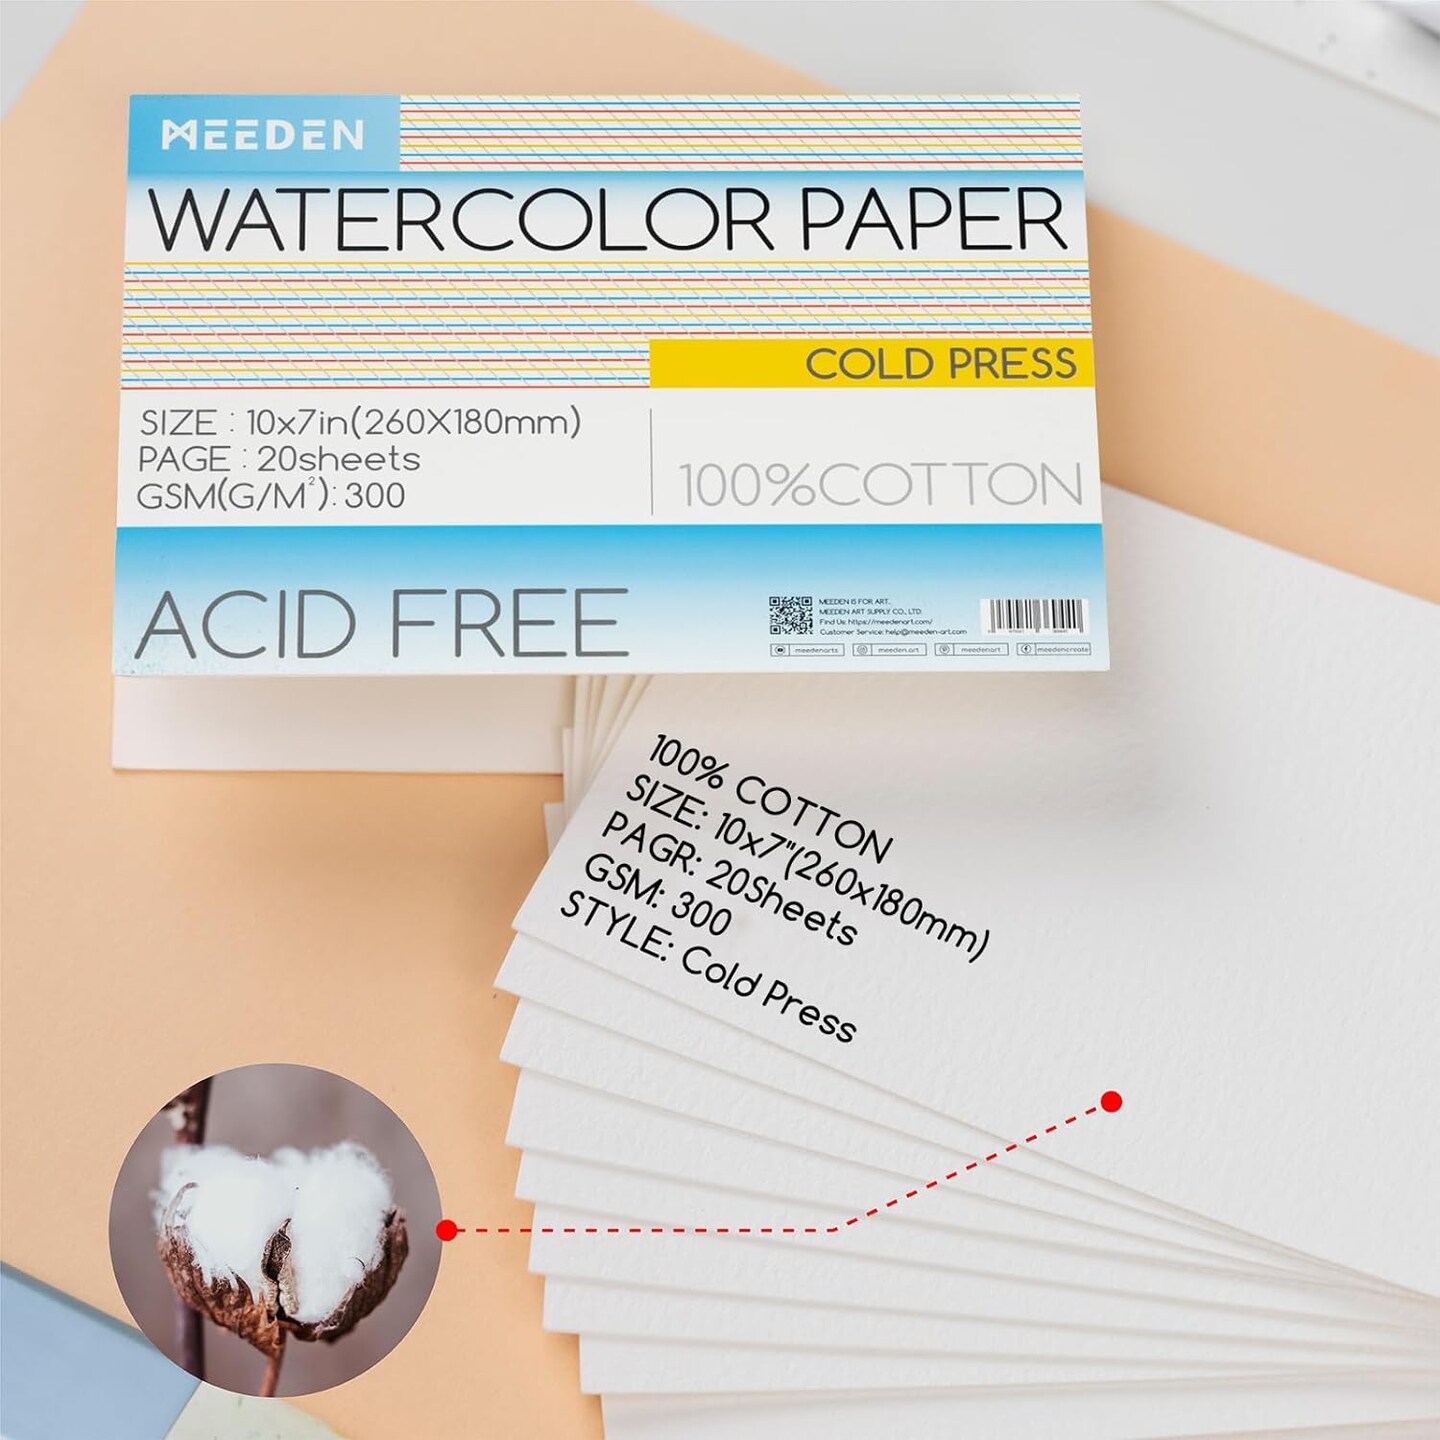 MEEDEN Watercolor Paper Block, 100% Cotton Watercolor Paper Pad of 20 Sheets, 140lb/300gsm, Acid-Free Art Paper for Watercolor, Gouache, Ink and More, 10&#x22; x 7&#x22; Cold Press